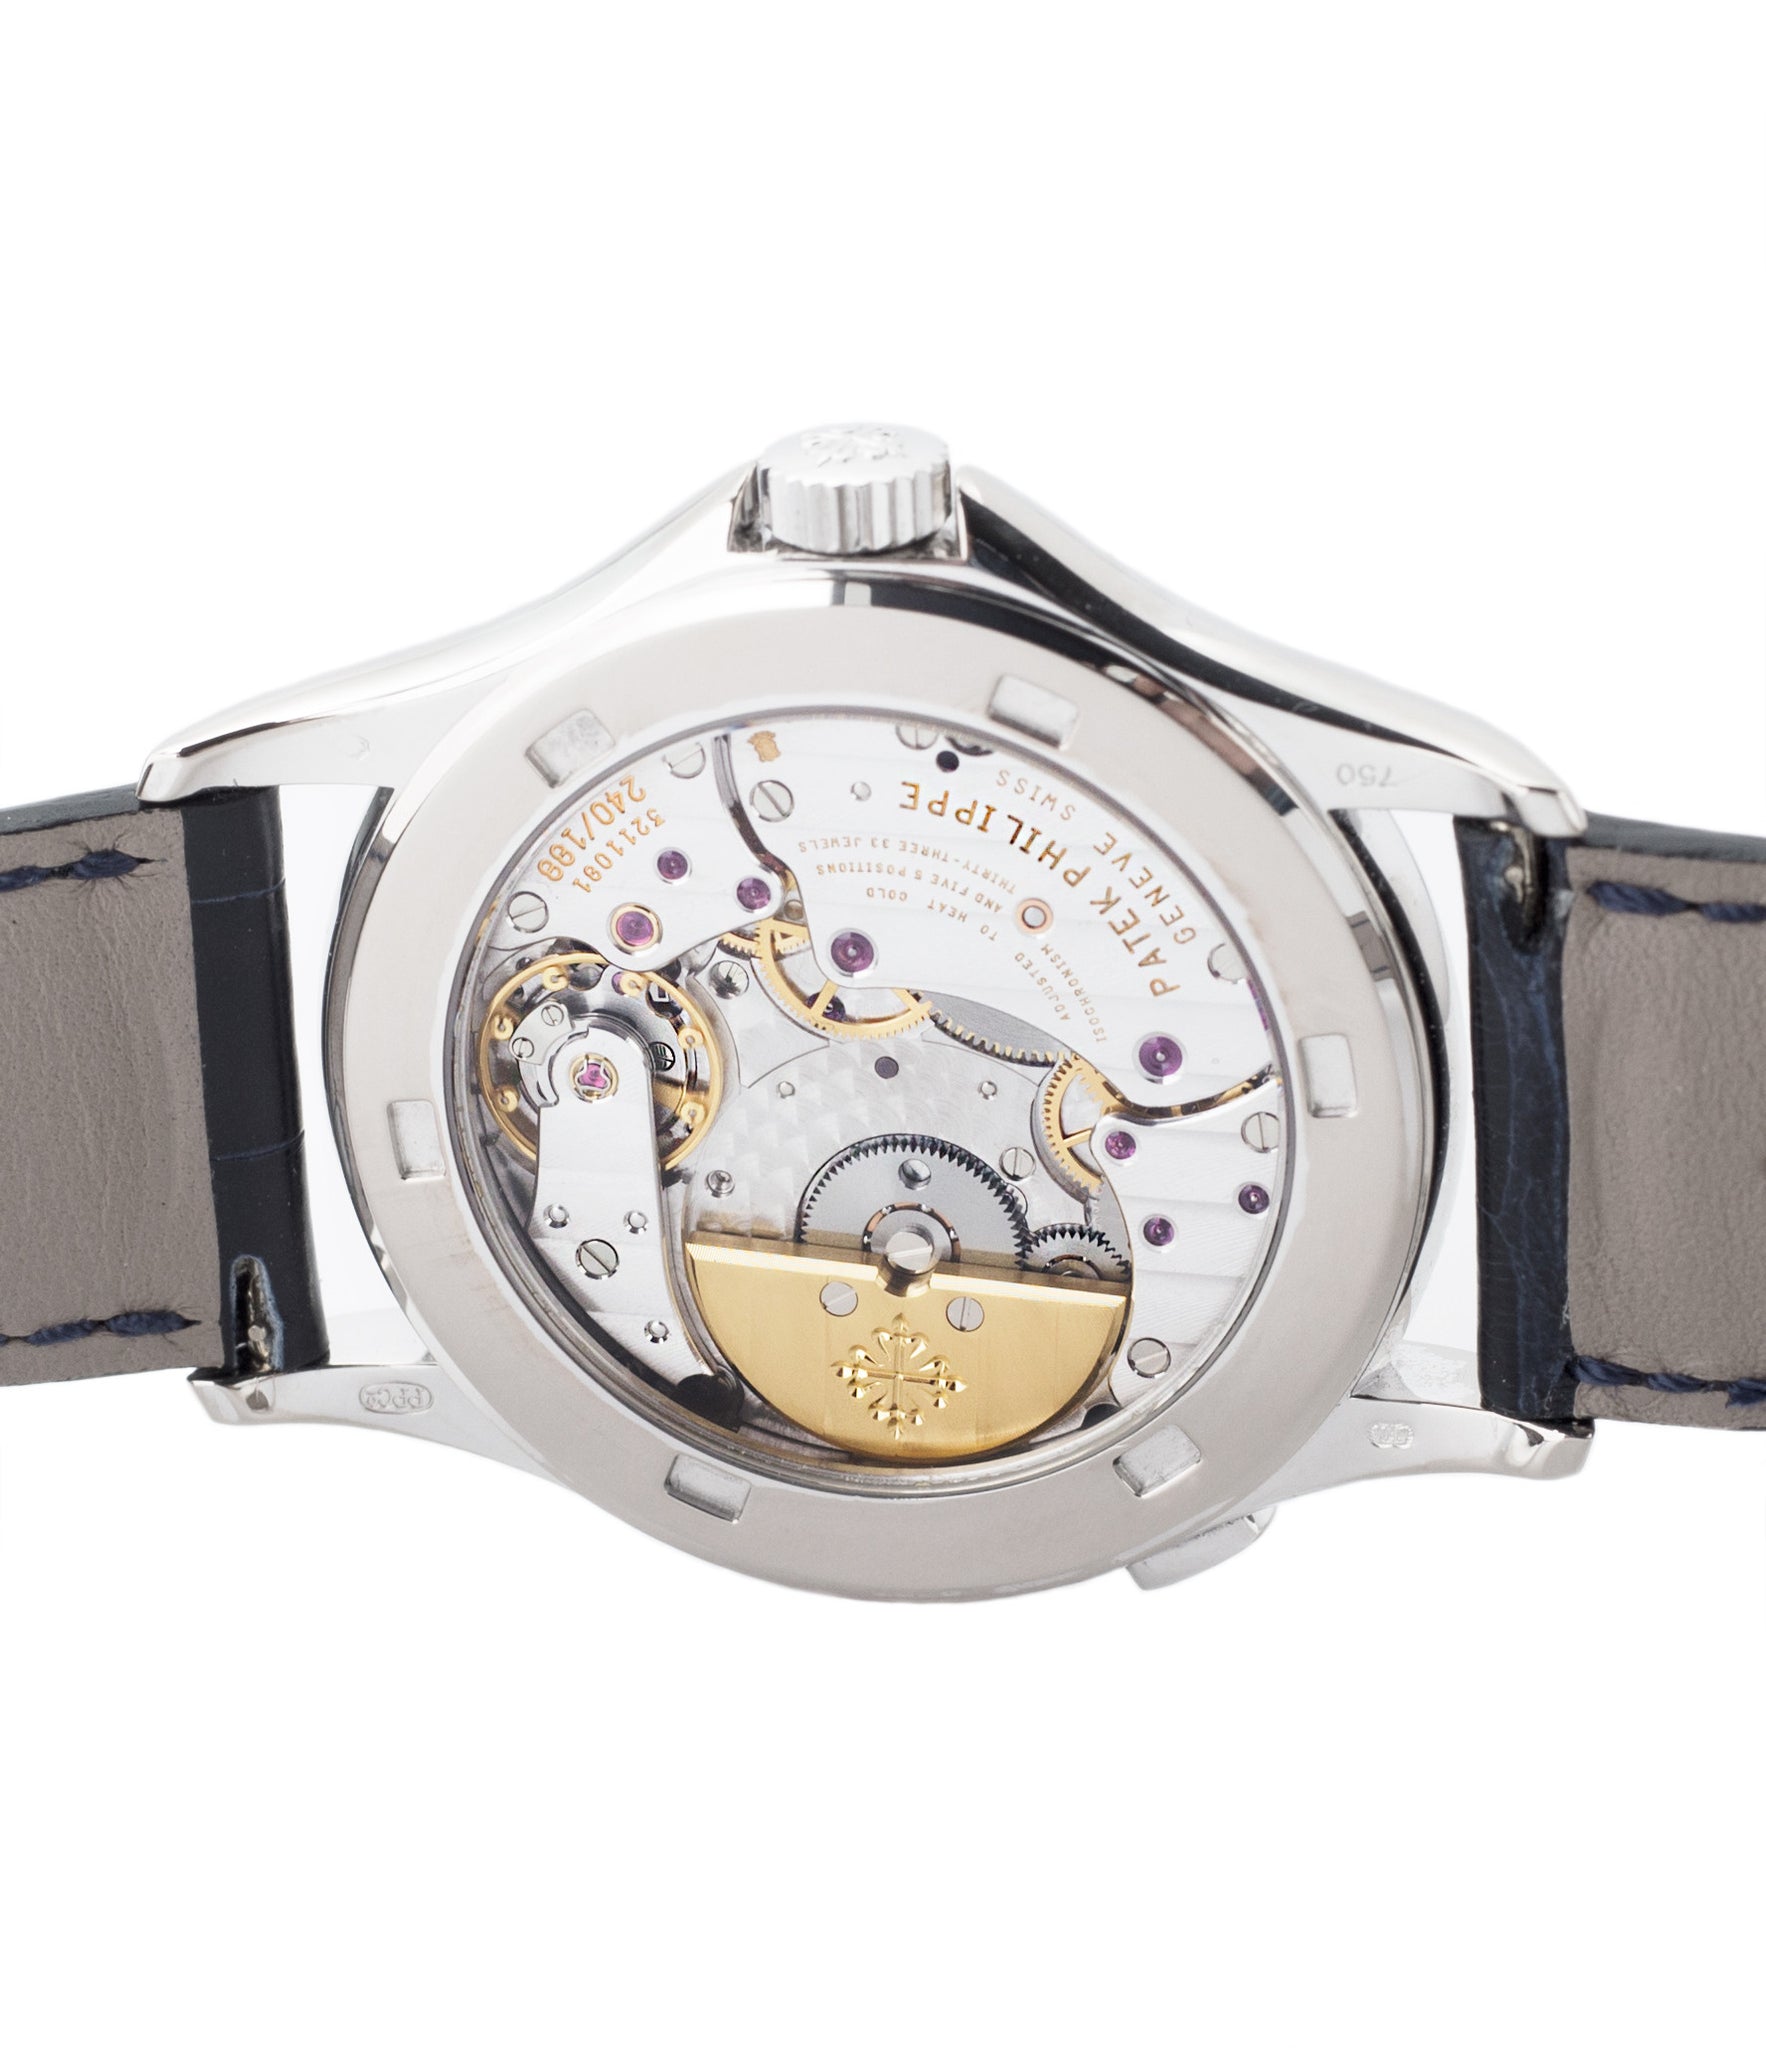 automatic 240HU Patek Philippe 5110G-001 white gold World-timer luxury dress watch online for sale at A Collected Man London specialist preowned luxury watches